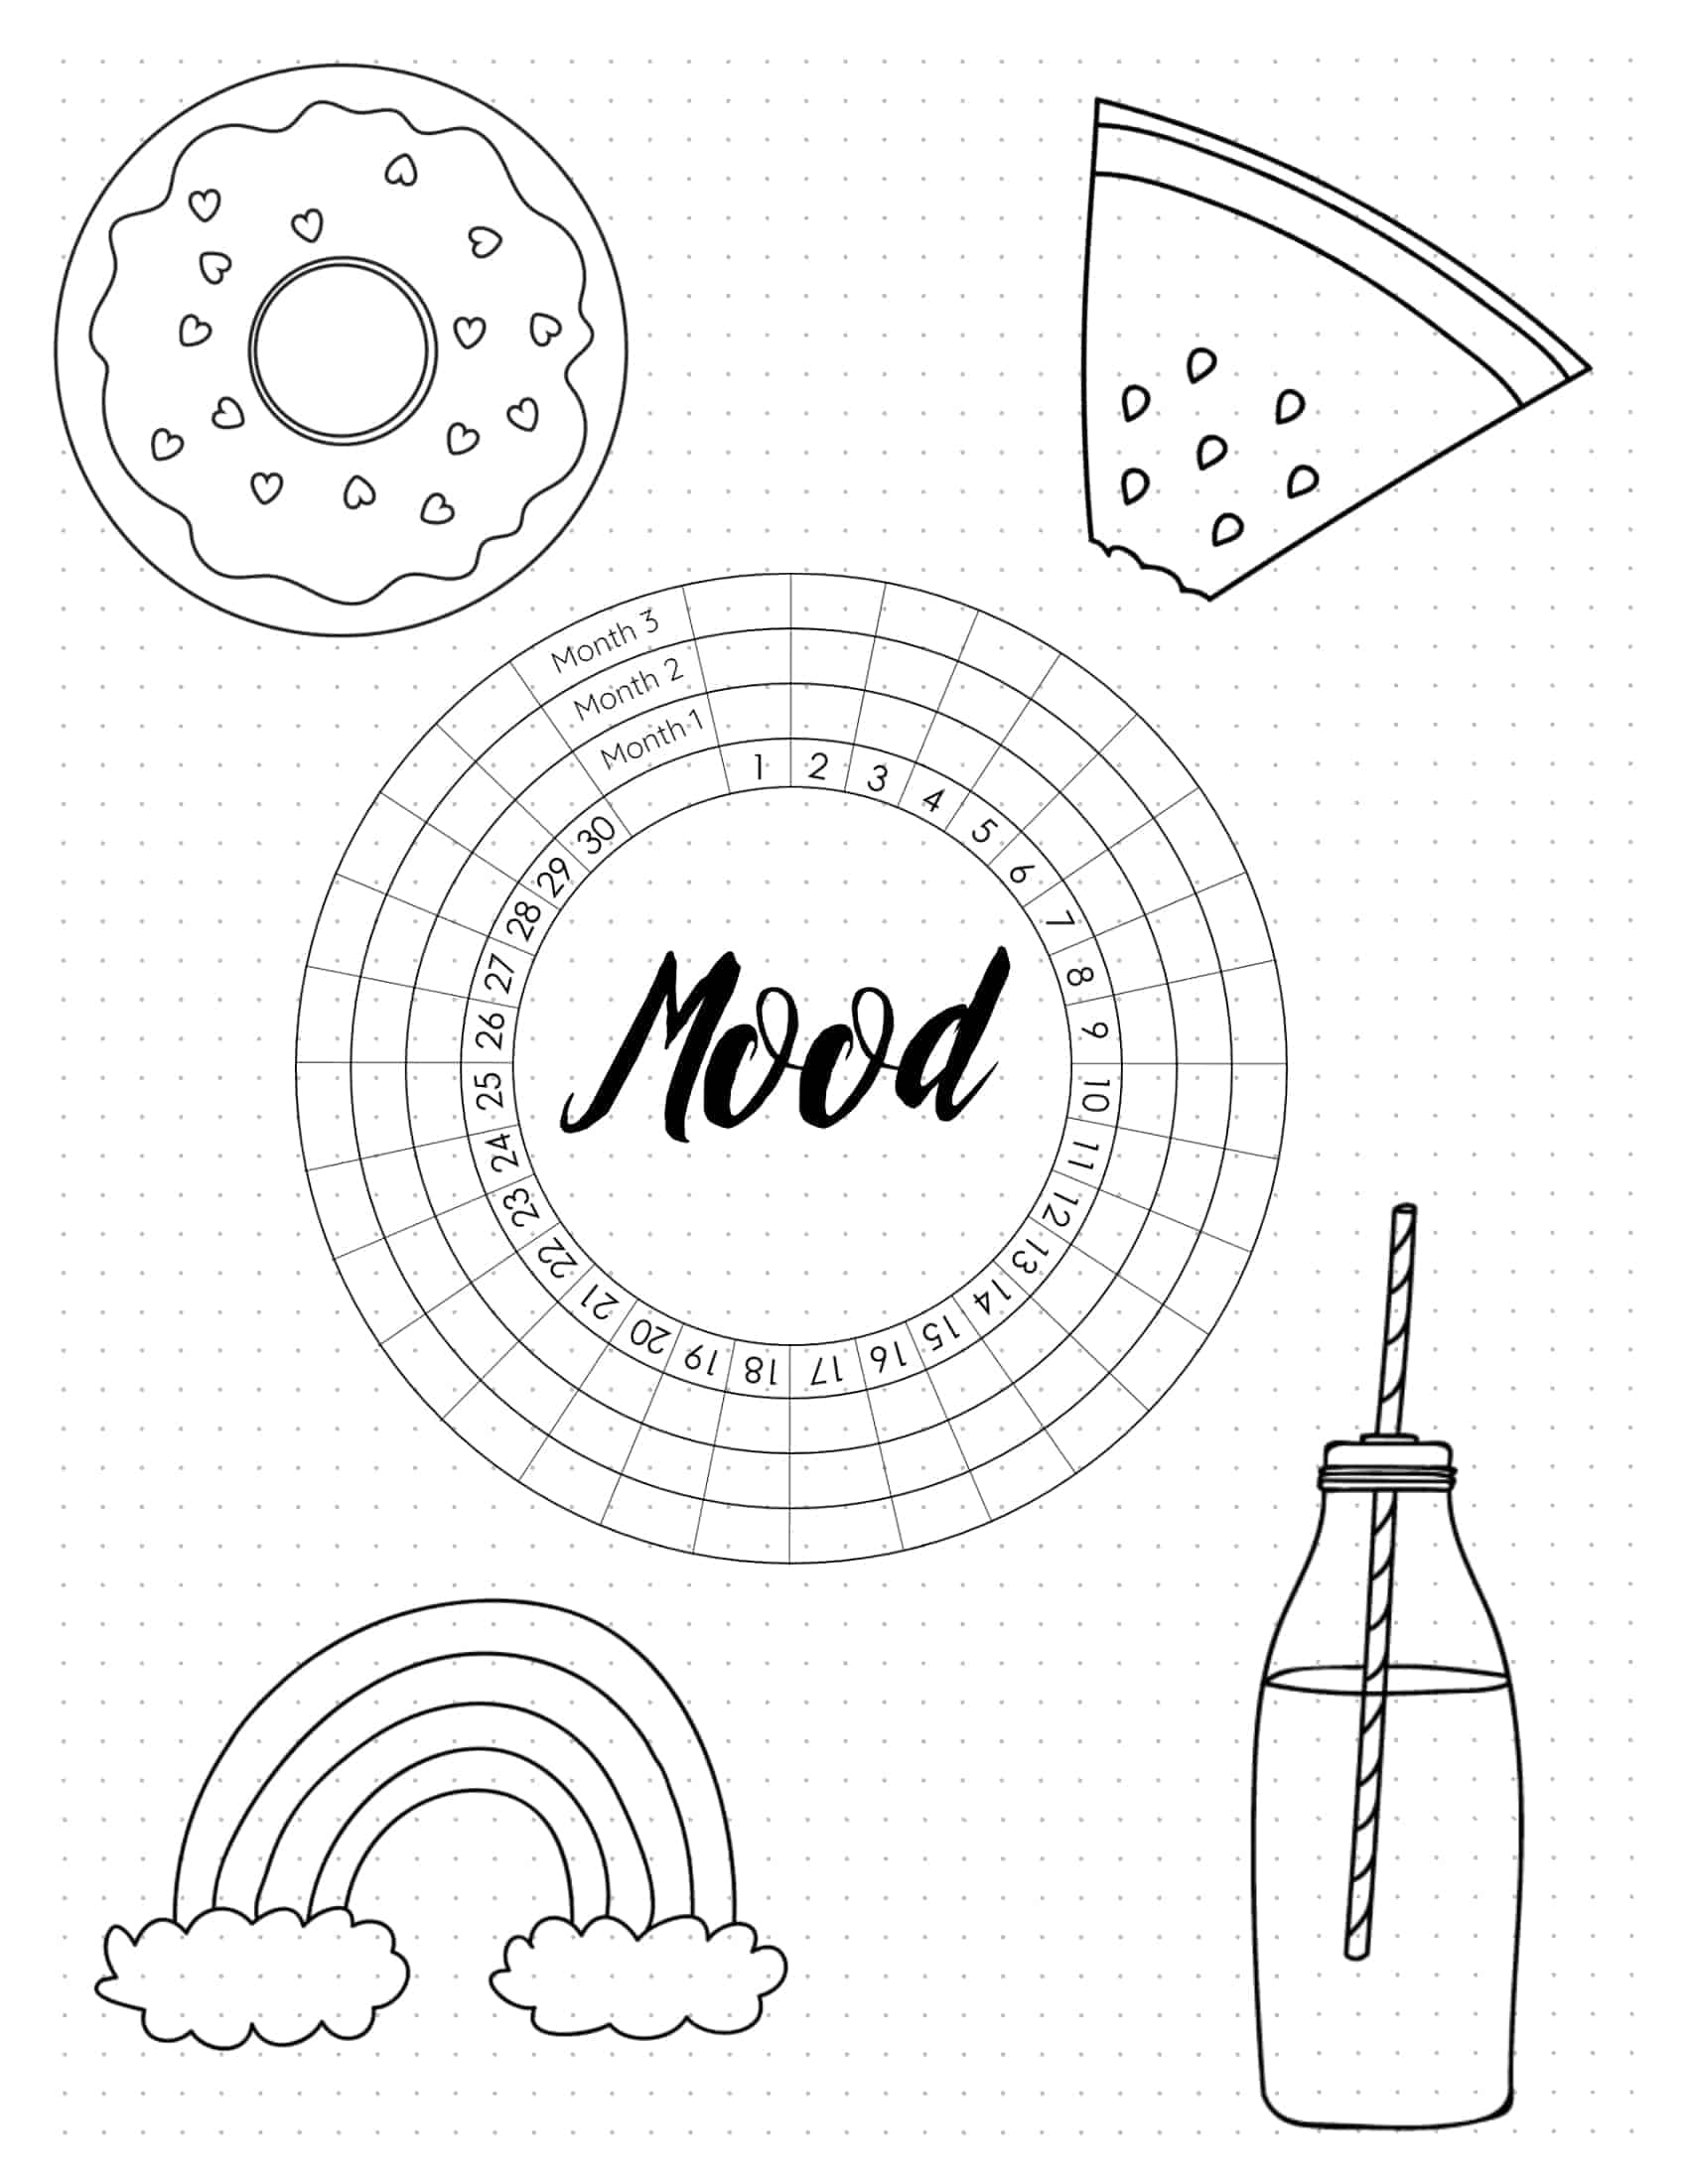 FREE Printable Mood Tracker Bullet Journal & Classic Style 20 Templates